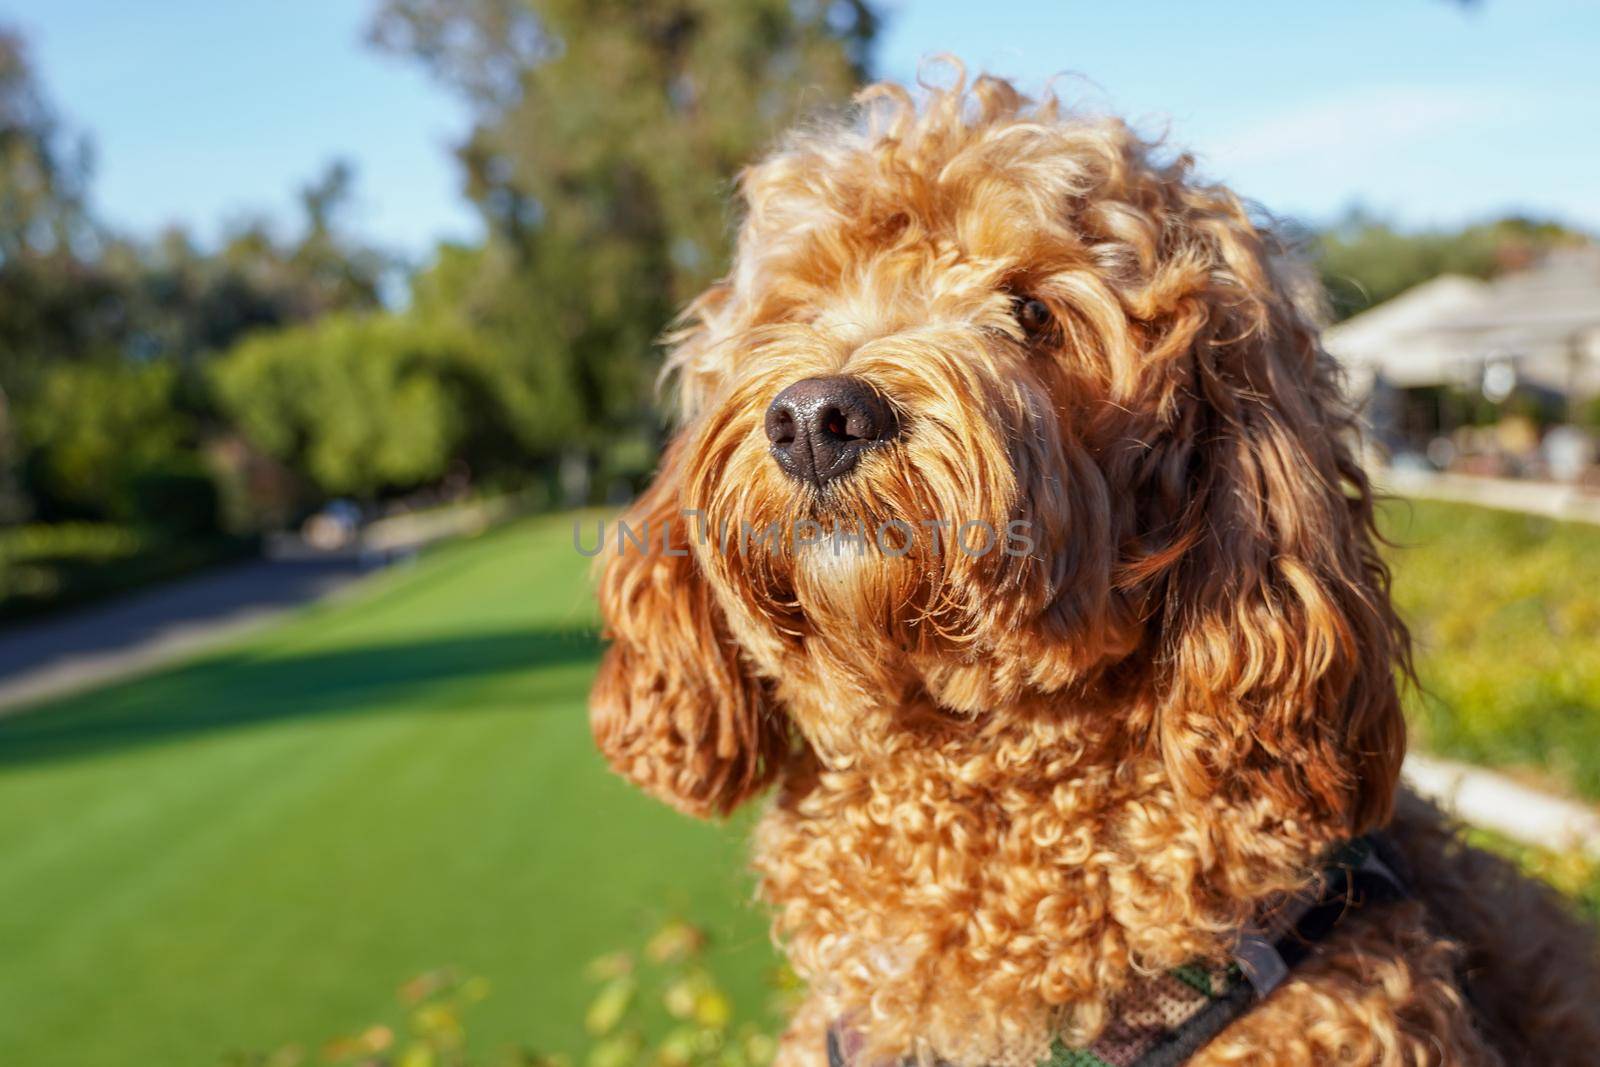 Cavapoo dog resting in the sun at the park, mixed -breed of Cavalier King Charles Spaniel and Poodle.